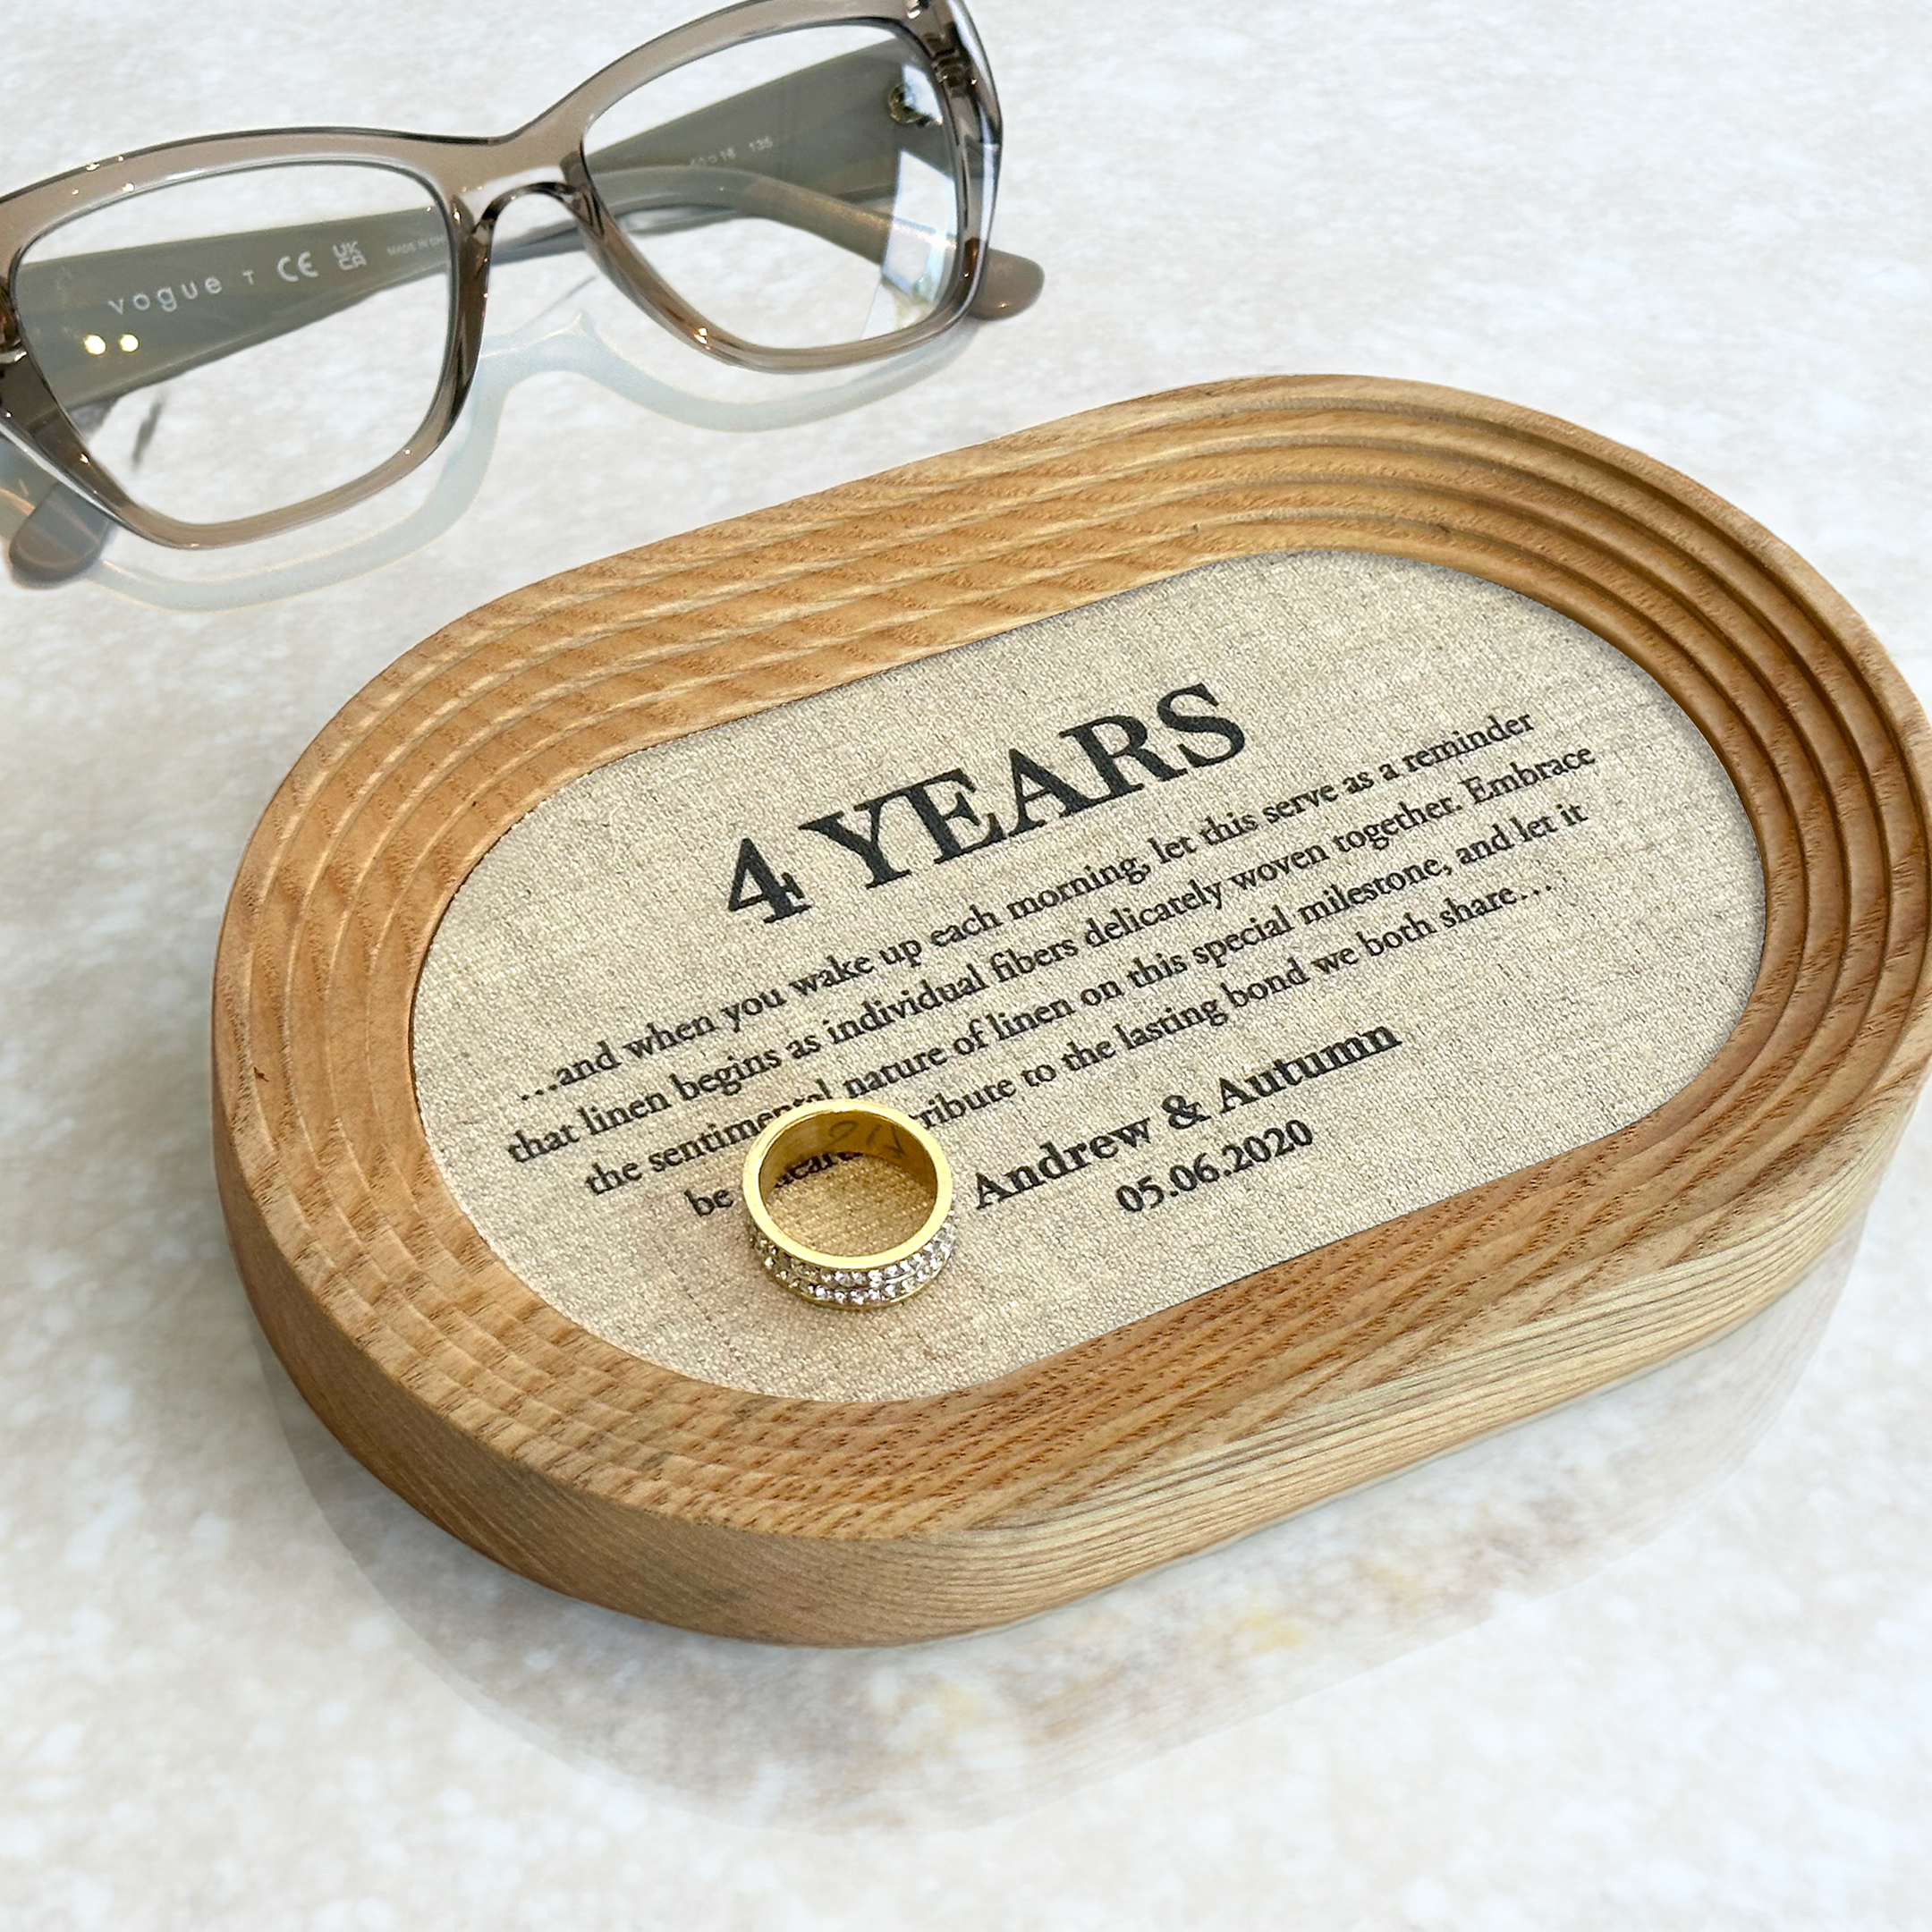 Customizable tray with wireless phone charging for 4th linen anniversary celebration -  iPhone/Samsung/Google phone compatible